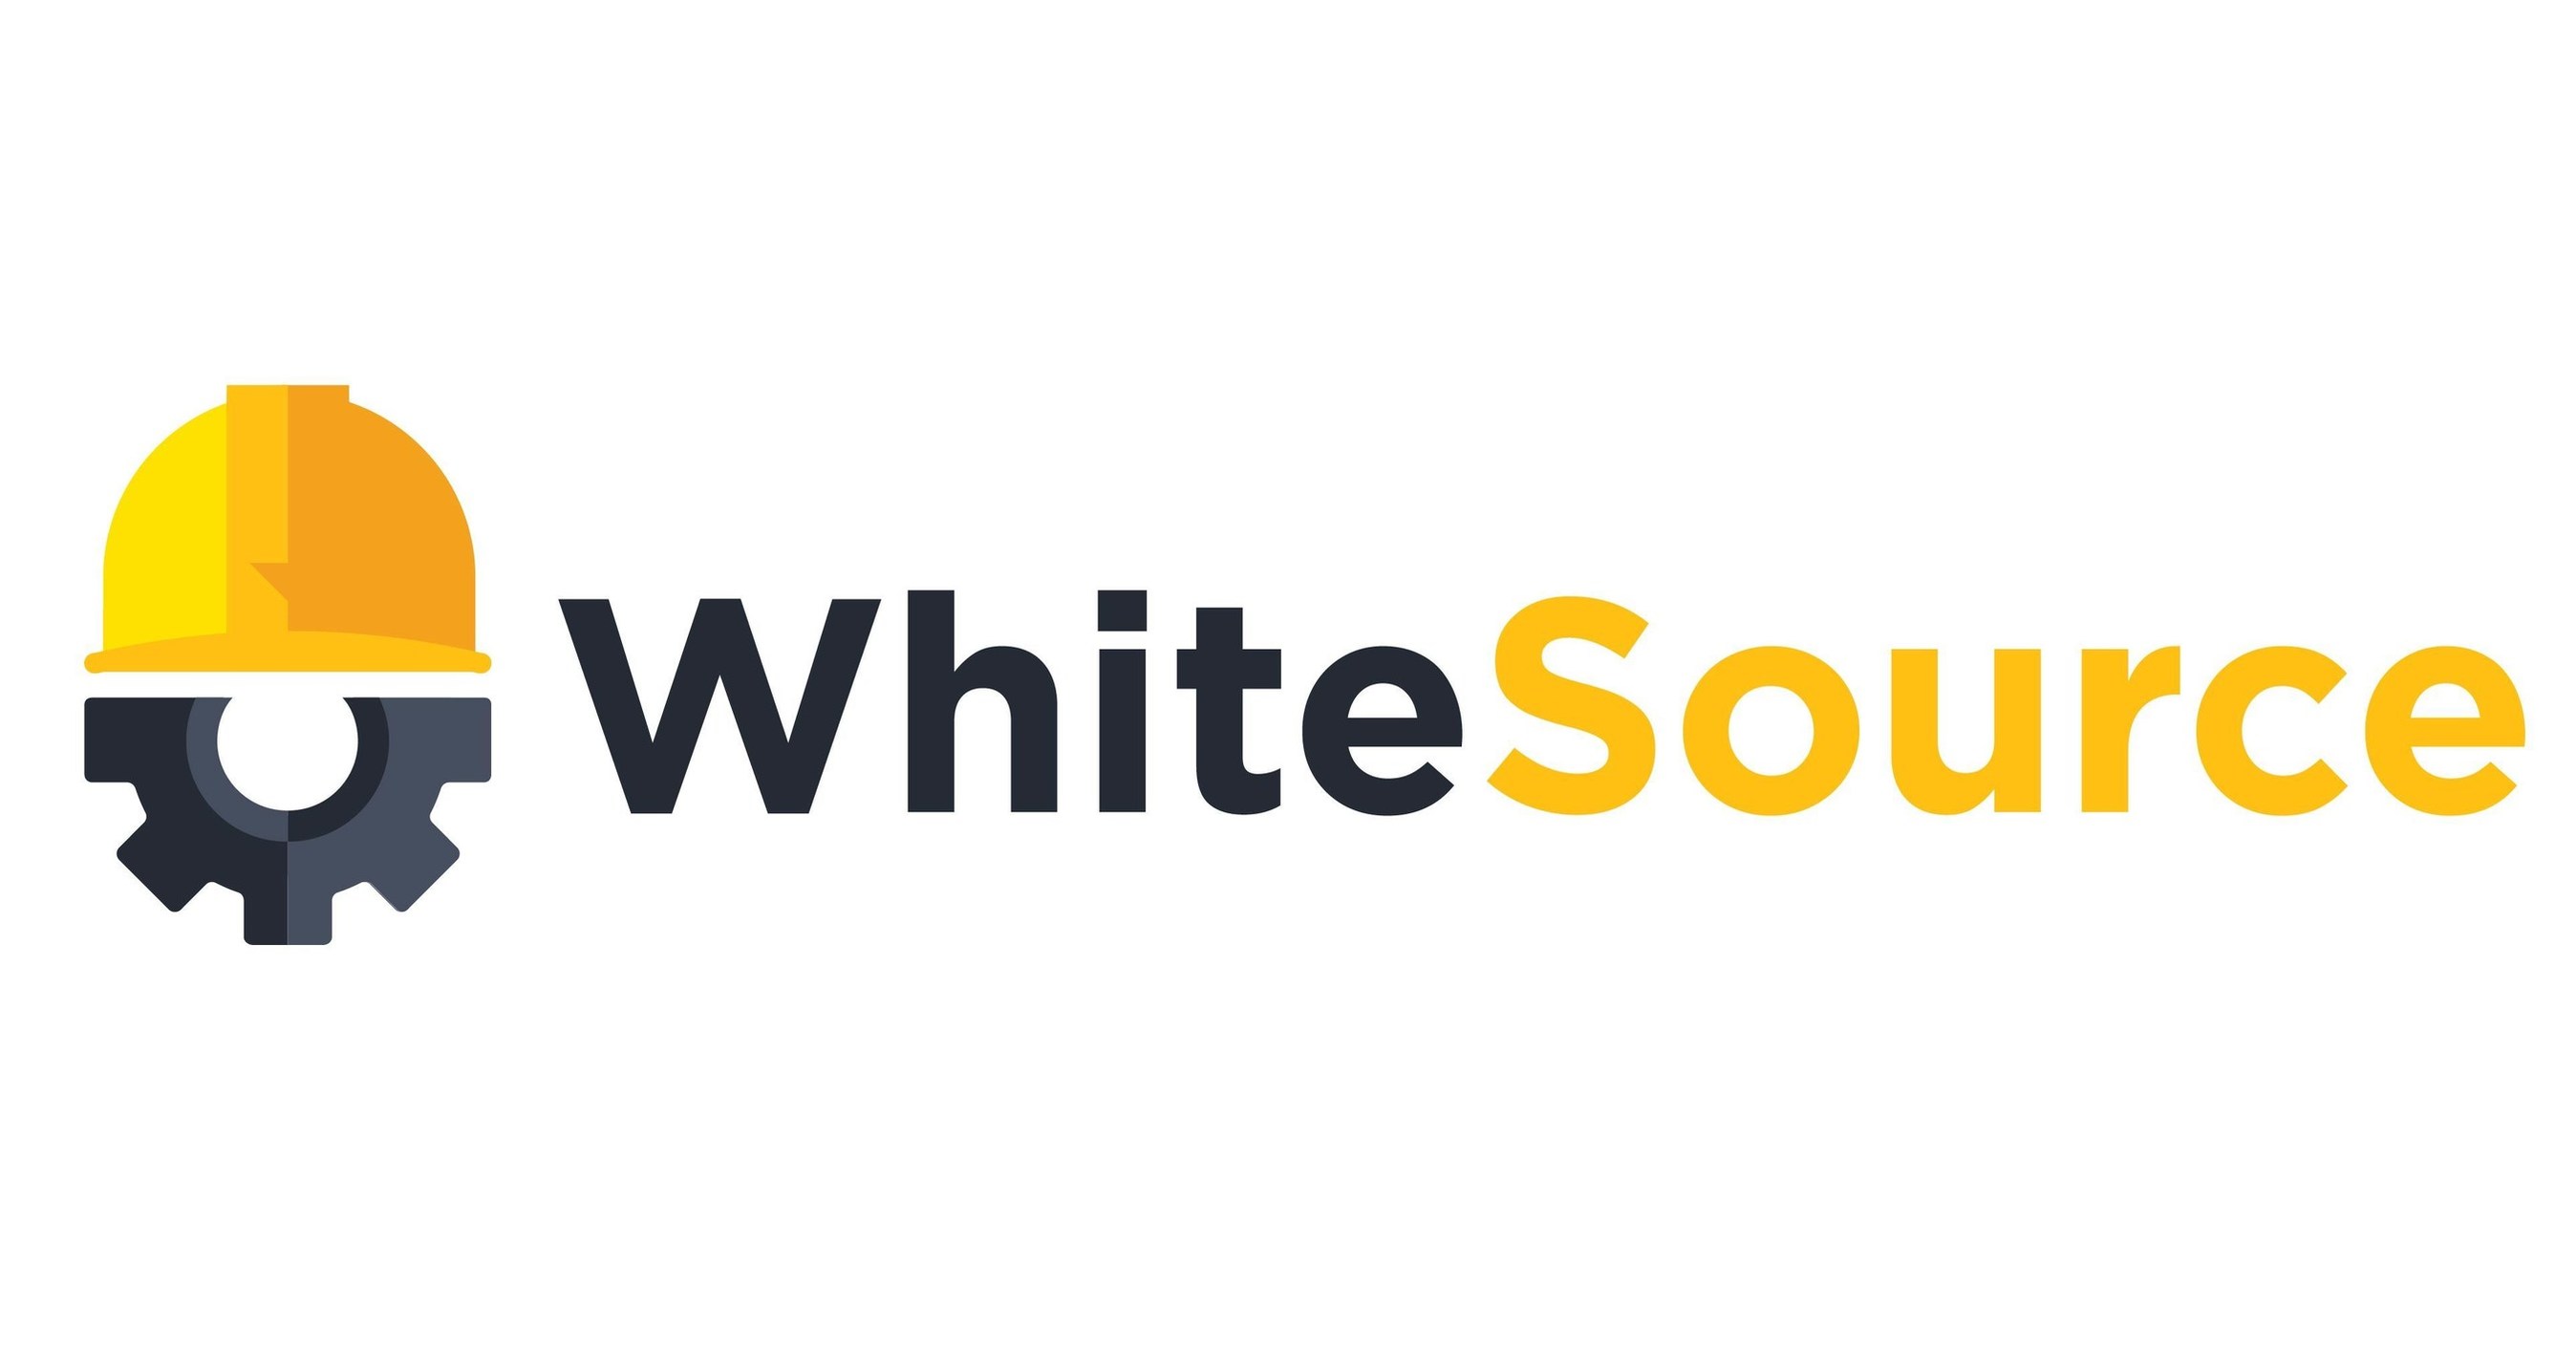 WhiteSource Extends its Patented Technology to Python, JavaScript